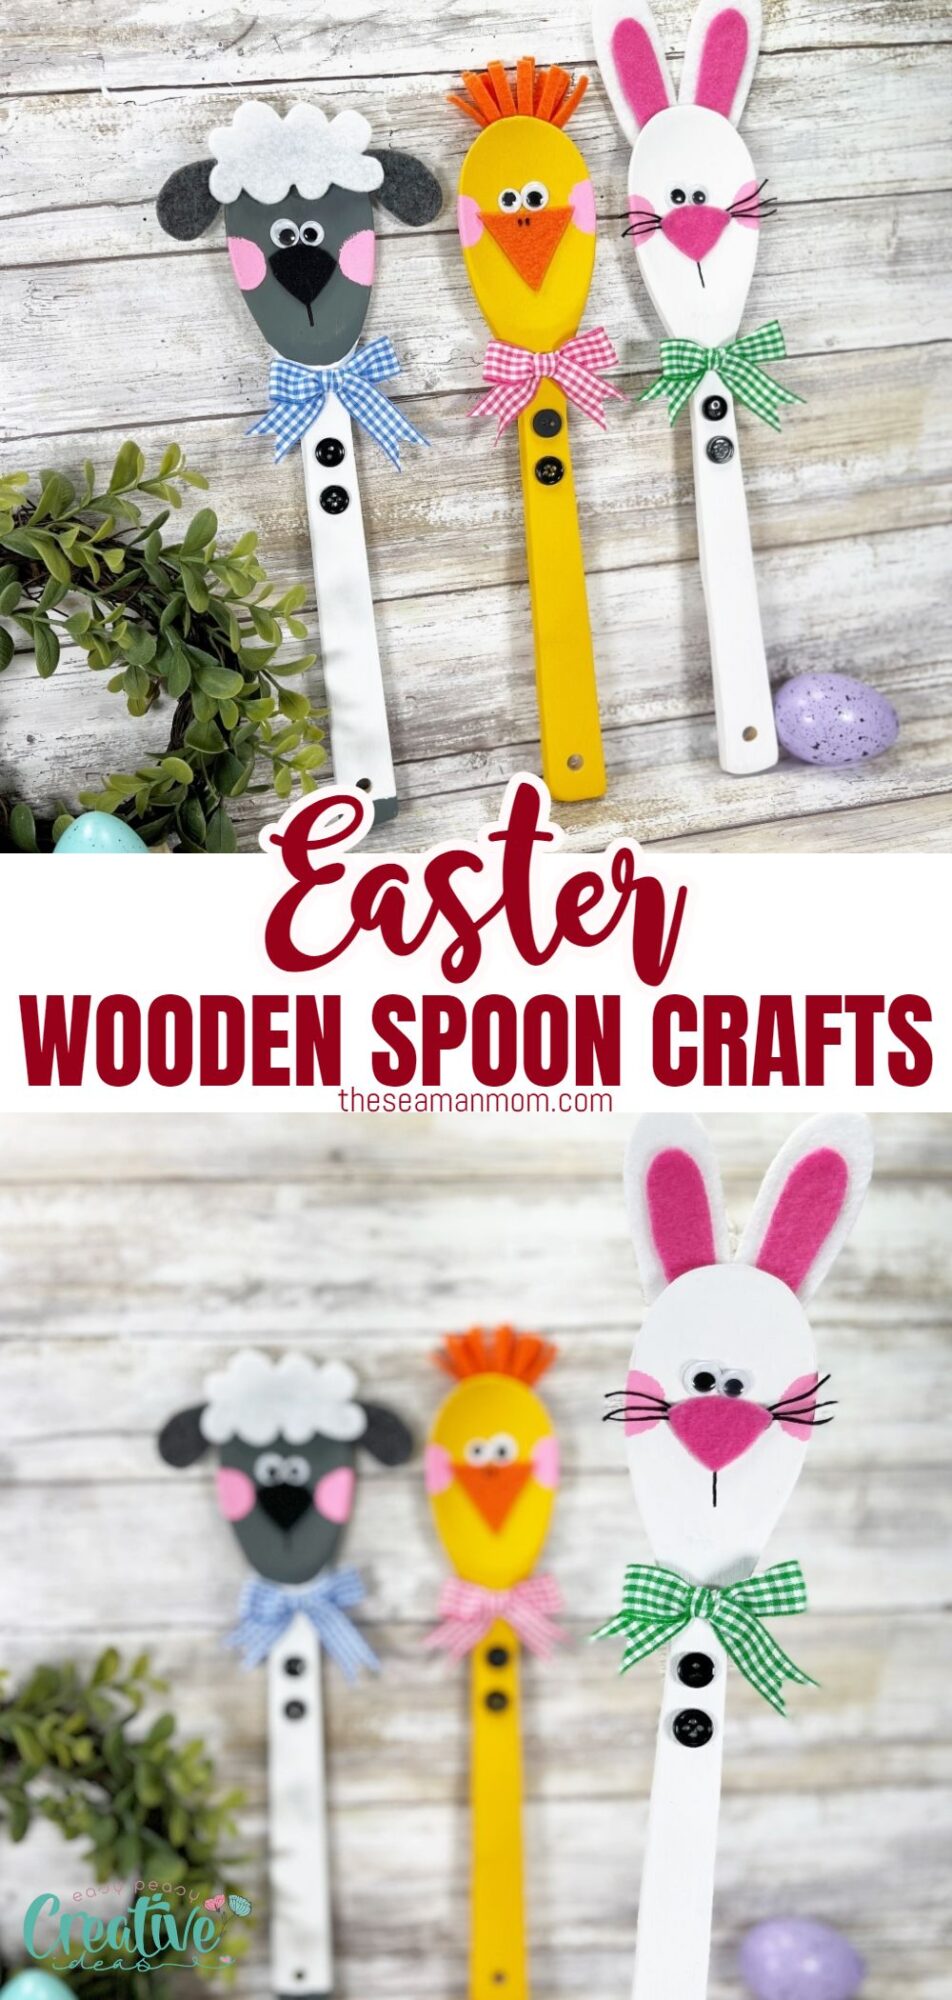 Easter-themed wooden spoons crafts with colorful decorations.